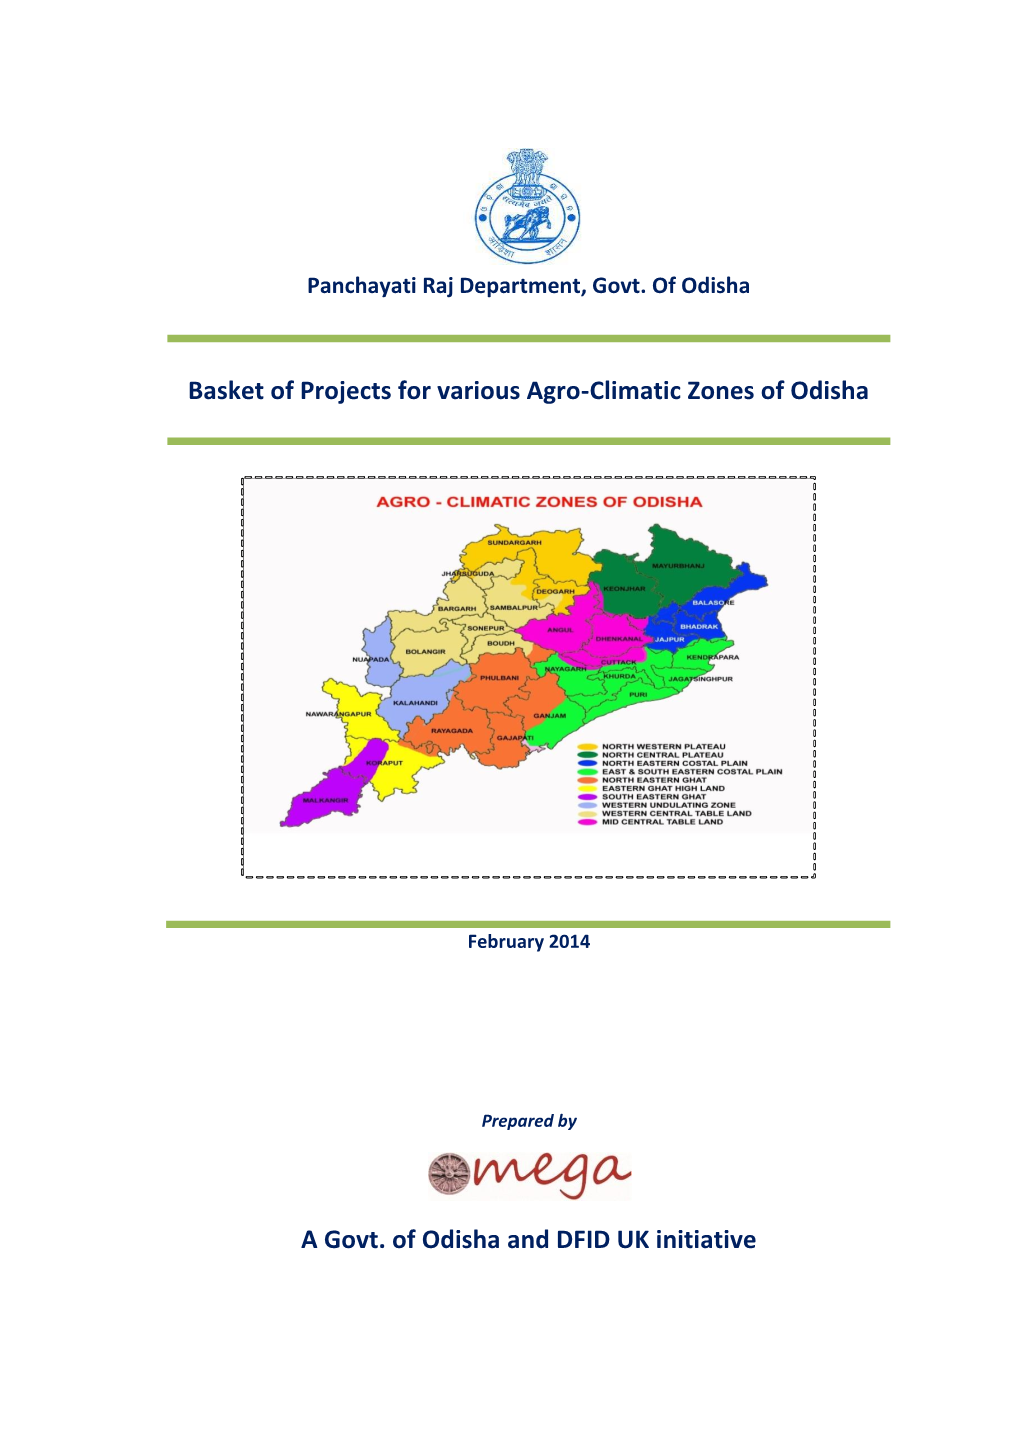 Basket of Projects for Various Agro-Climatic Zones of Odisha